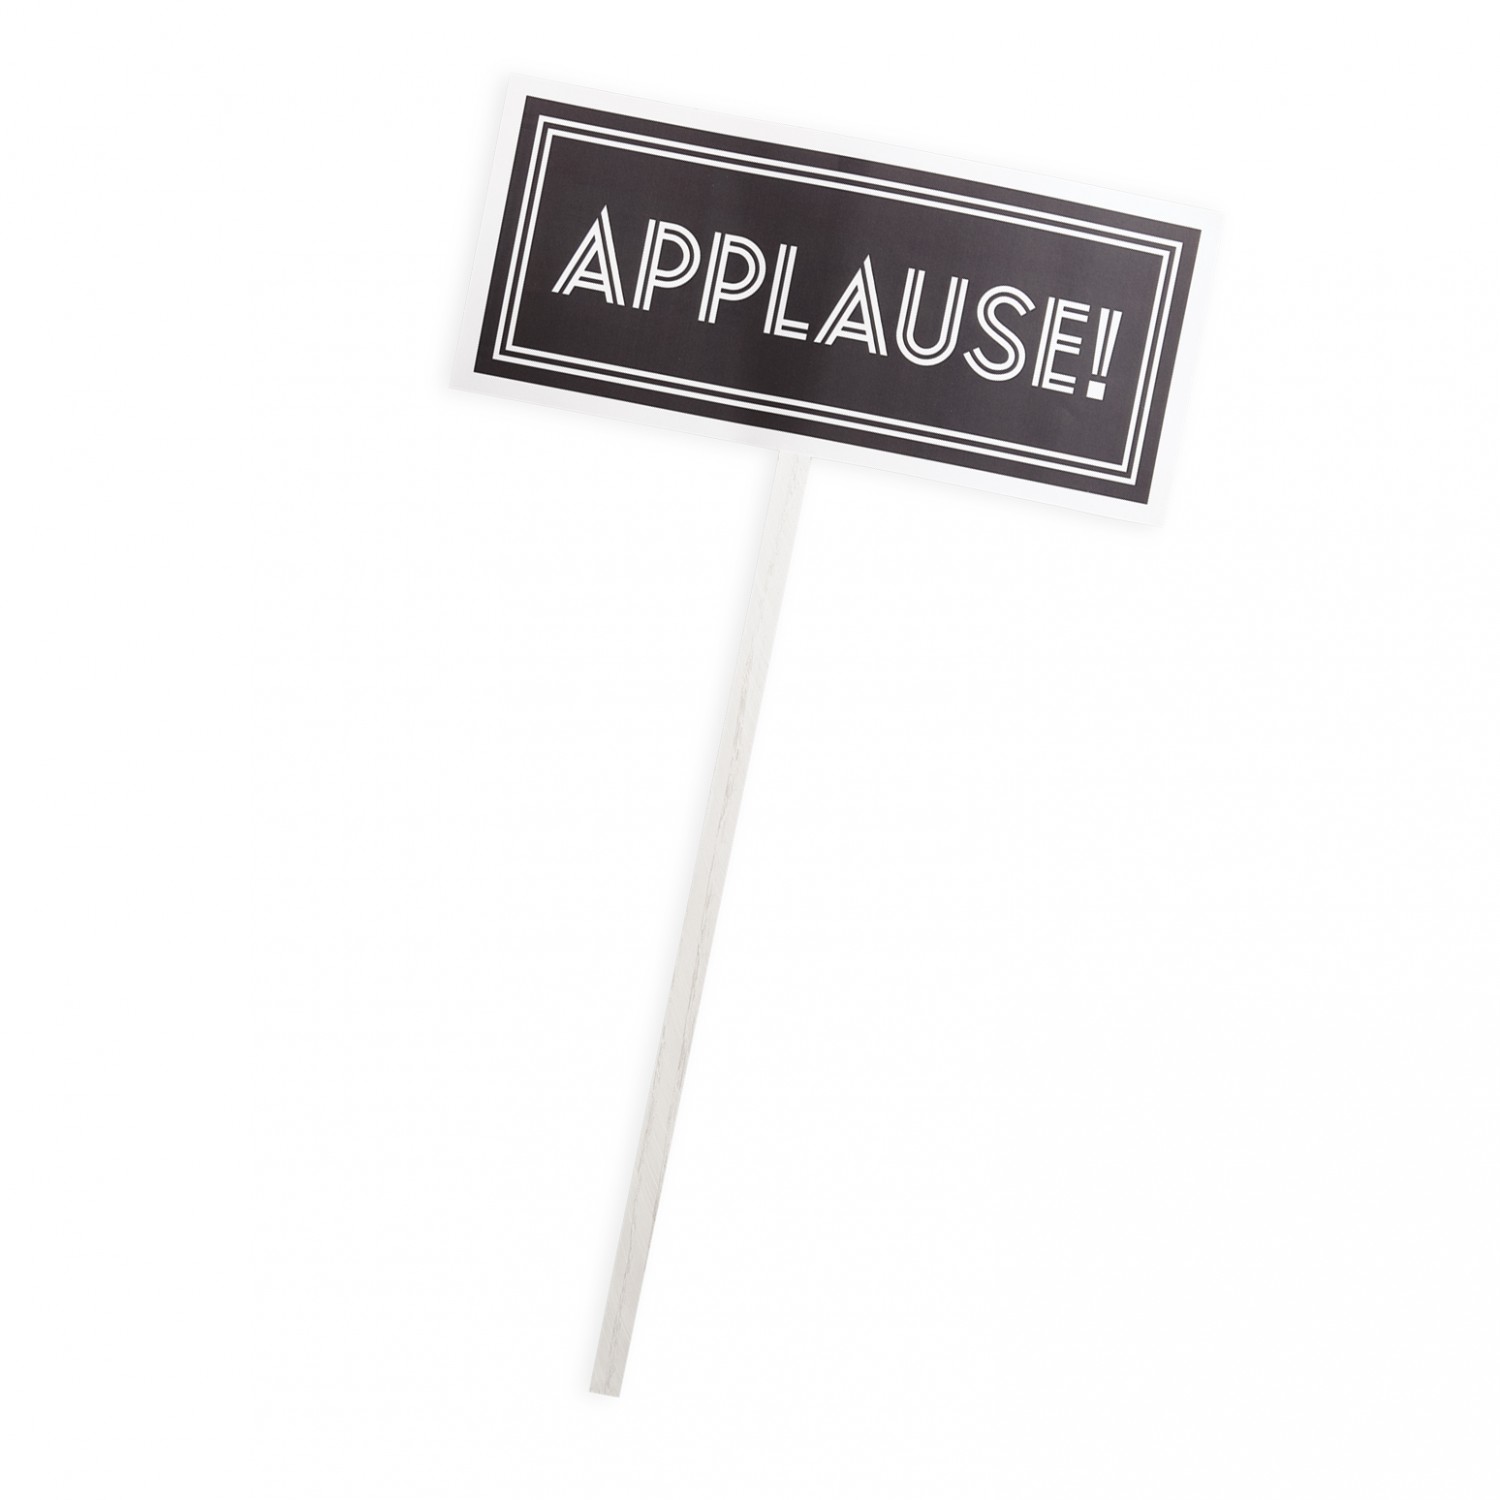 applause clipart applause sign